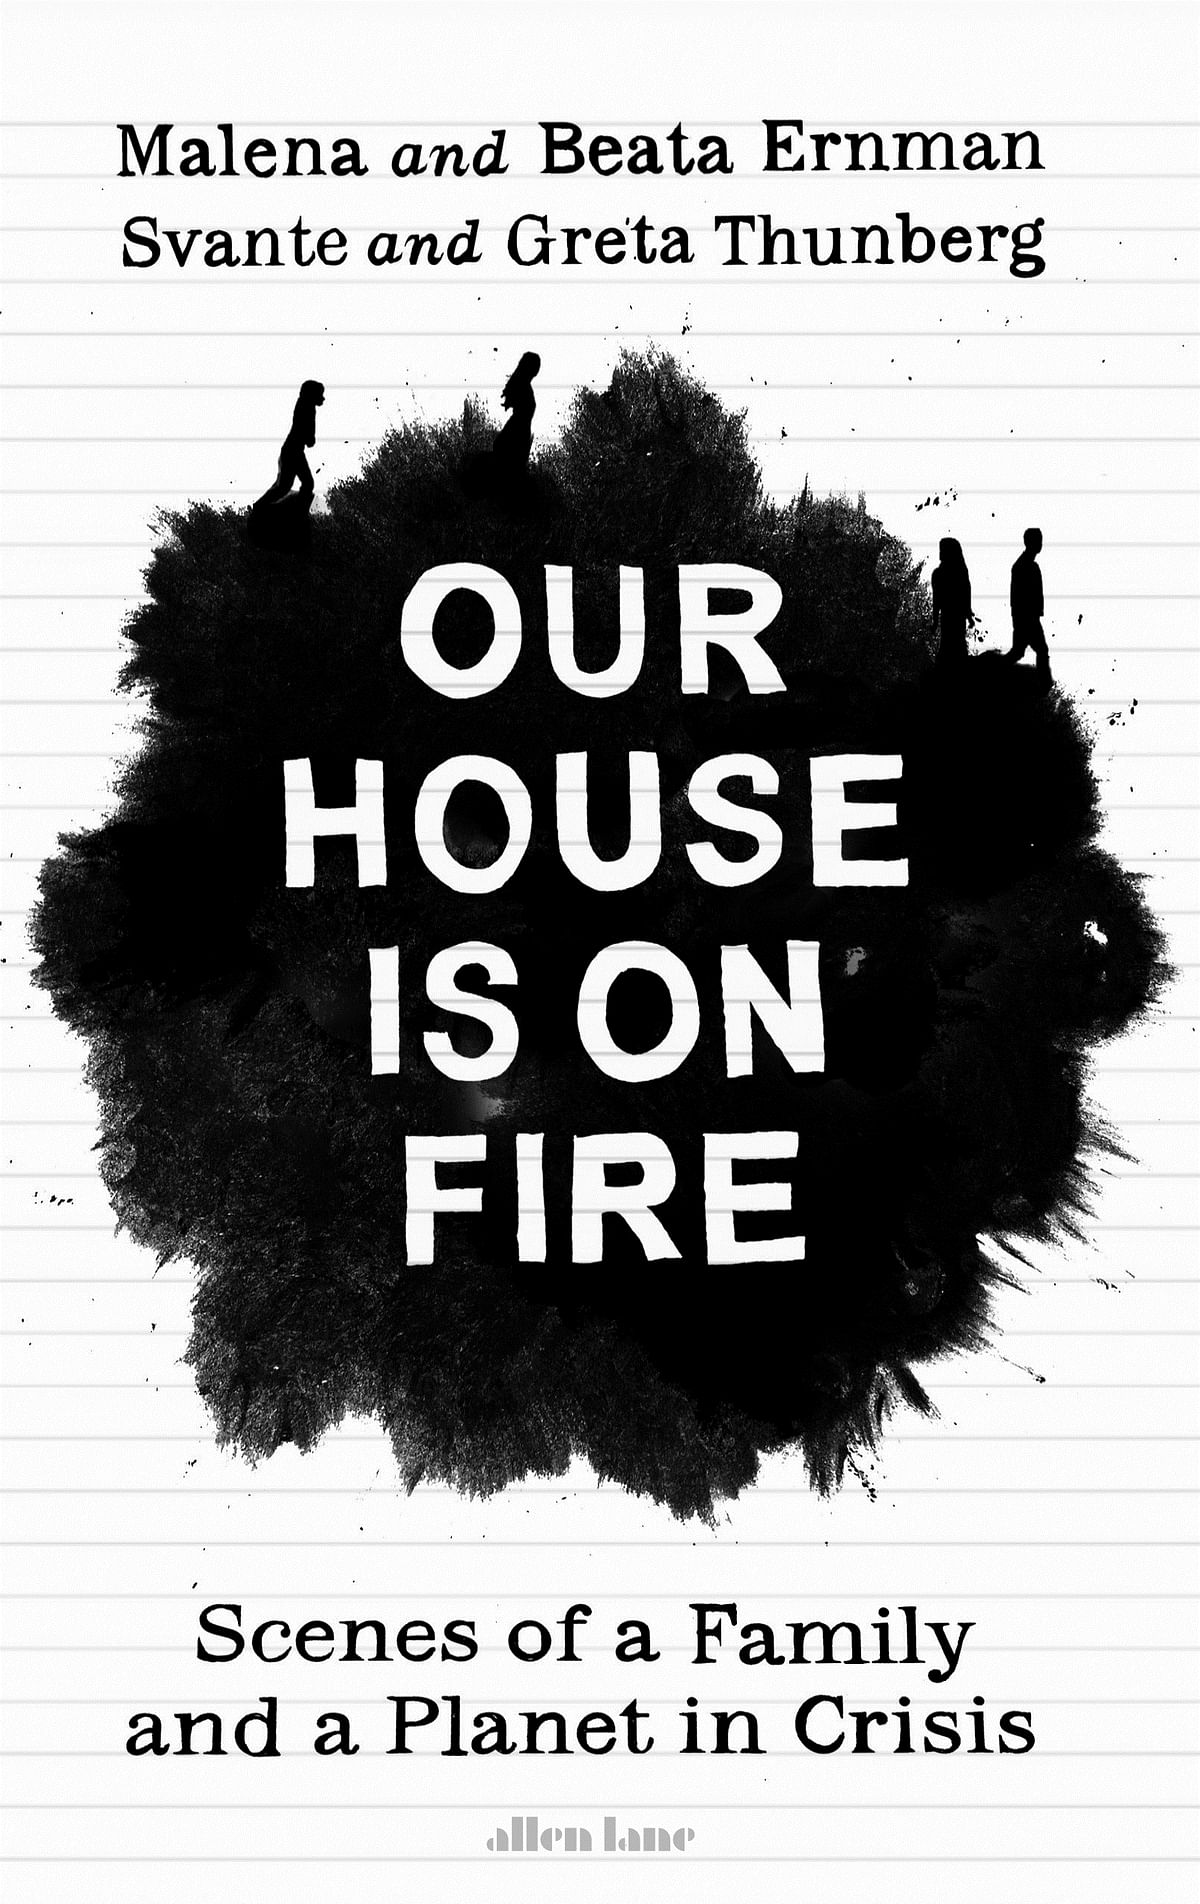 Our house is on fire – Scenes of A family and a planet in crisis